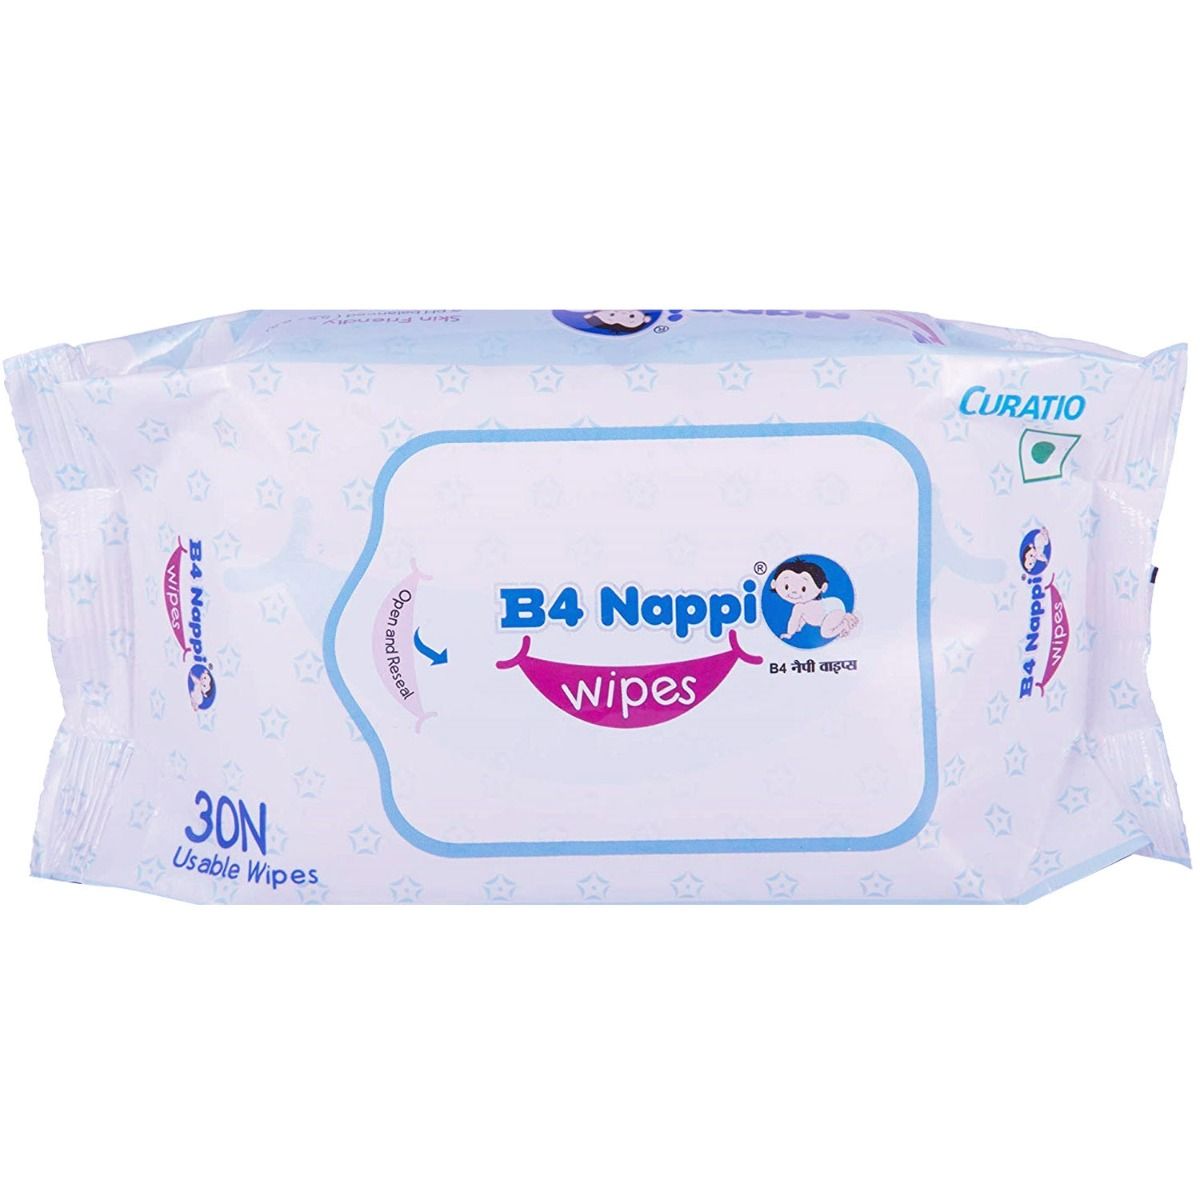 Buy B4-Nappi Wipes, 30 Count Online